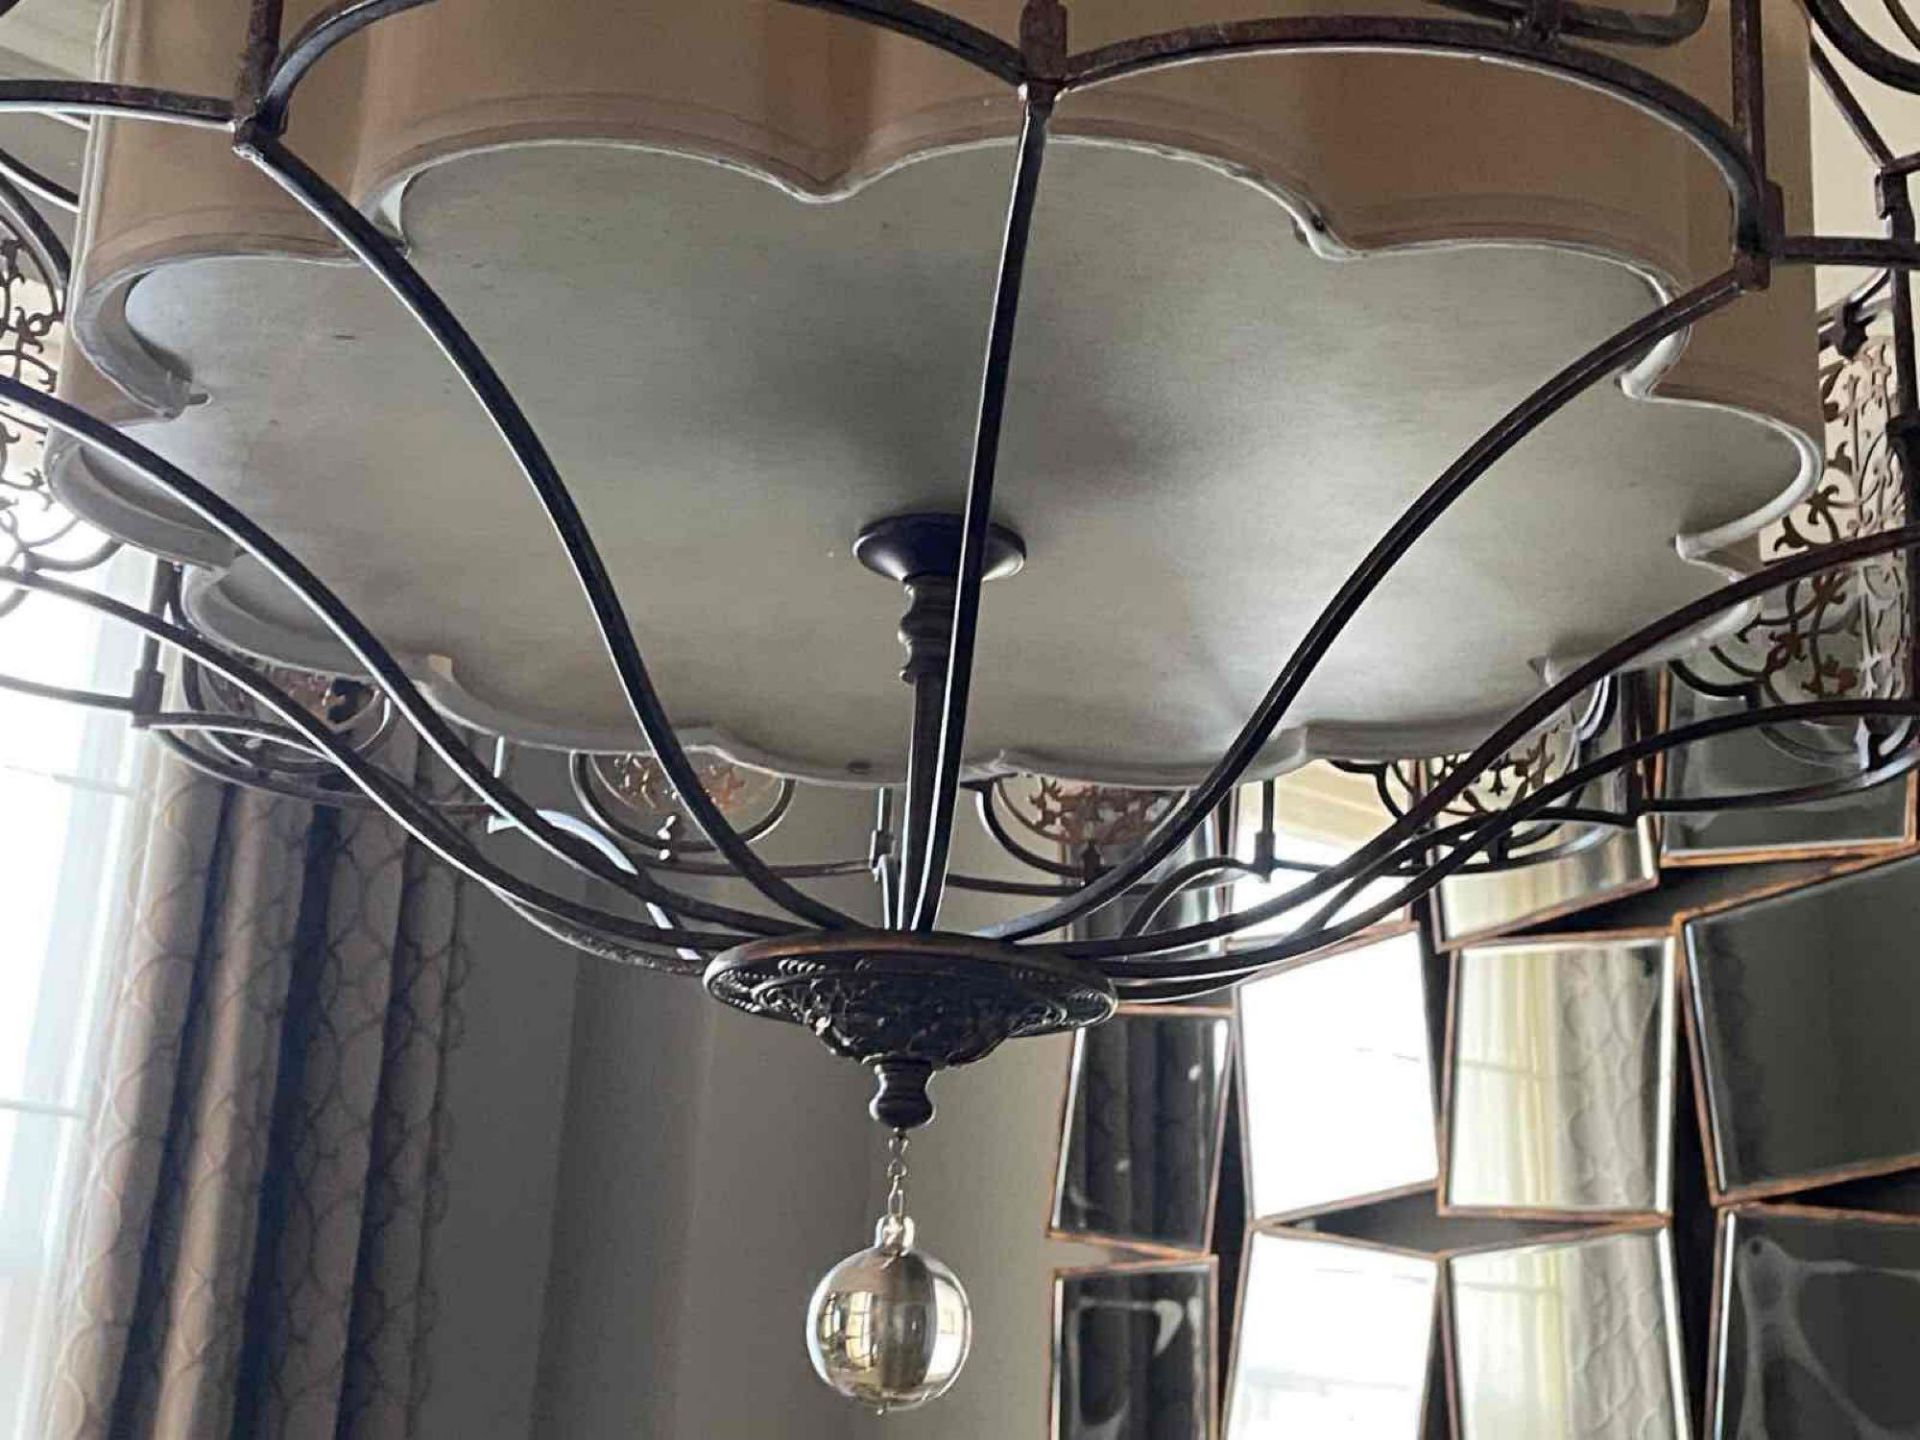 Feiss Marcella drum chandelier Featured in British bronze and oxidized bronze finishes with - Image 4 of 6